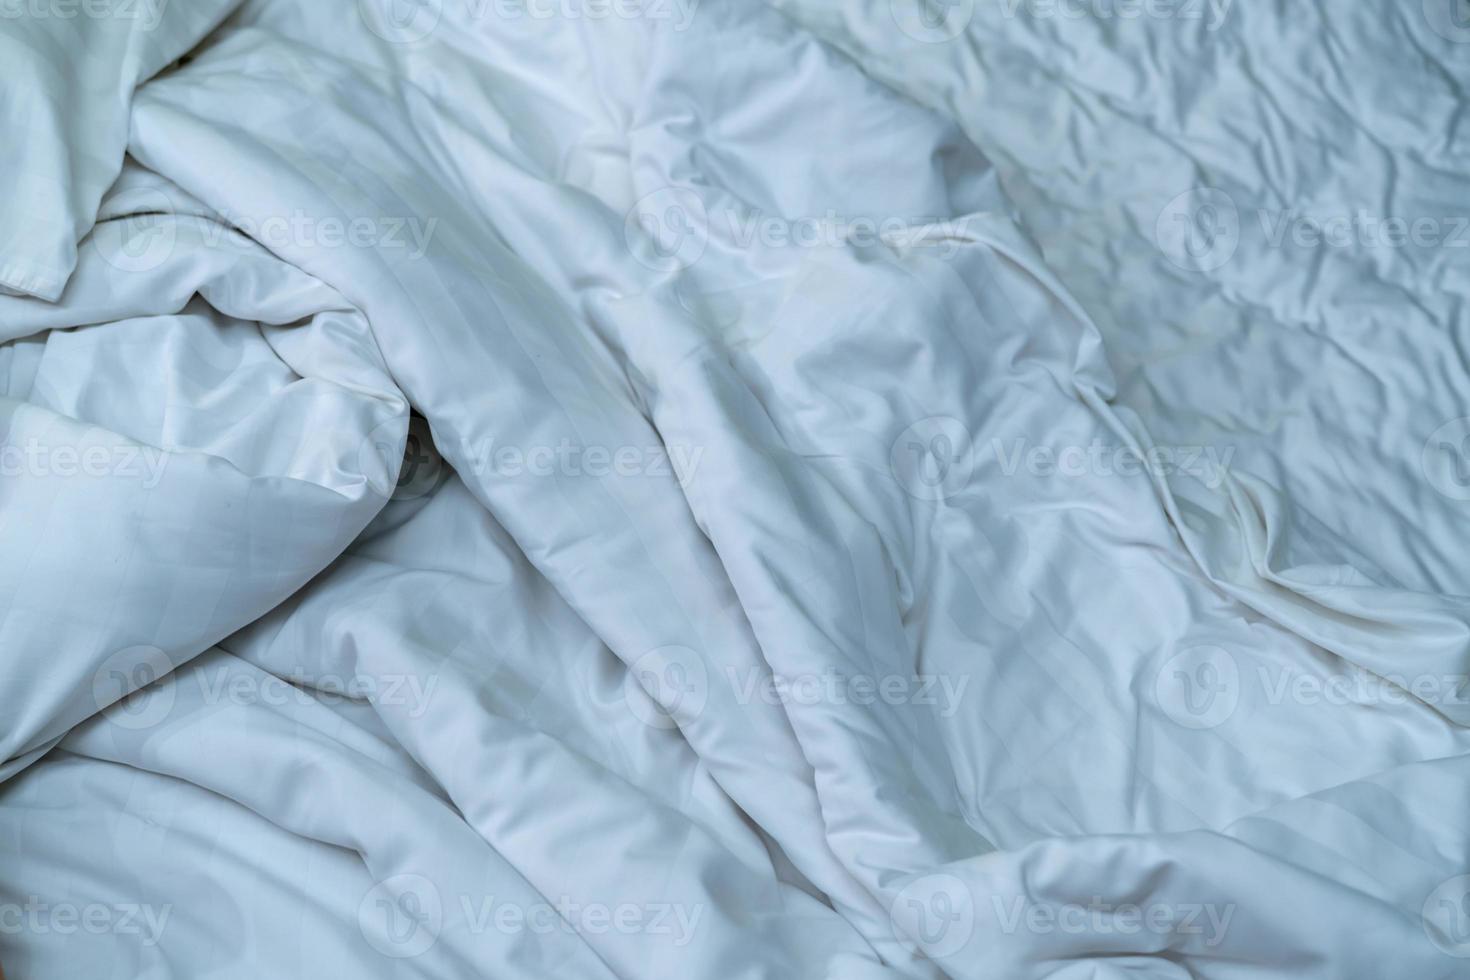 White linen blanket in hotel bedroom. Close up detail of messy white blanket after waking up in morning. Comfortable bed with soft white duvet. Sleep tight with good quality bedding household concept. photo